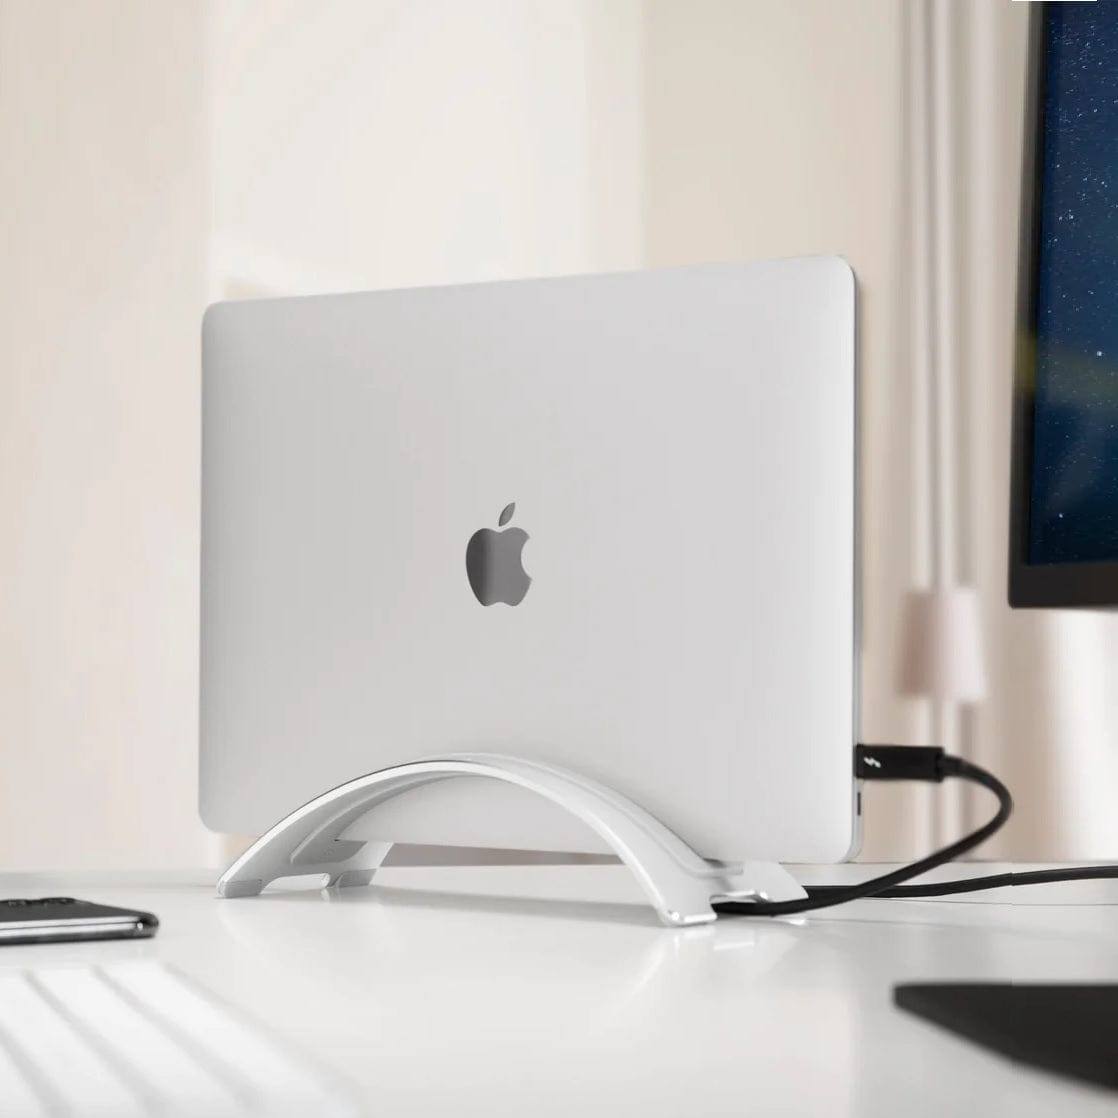 The everything gift guide for Mac users | Macworld